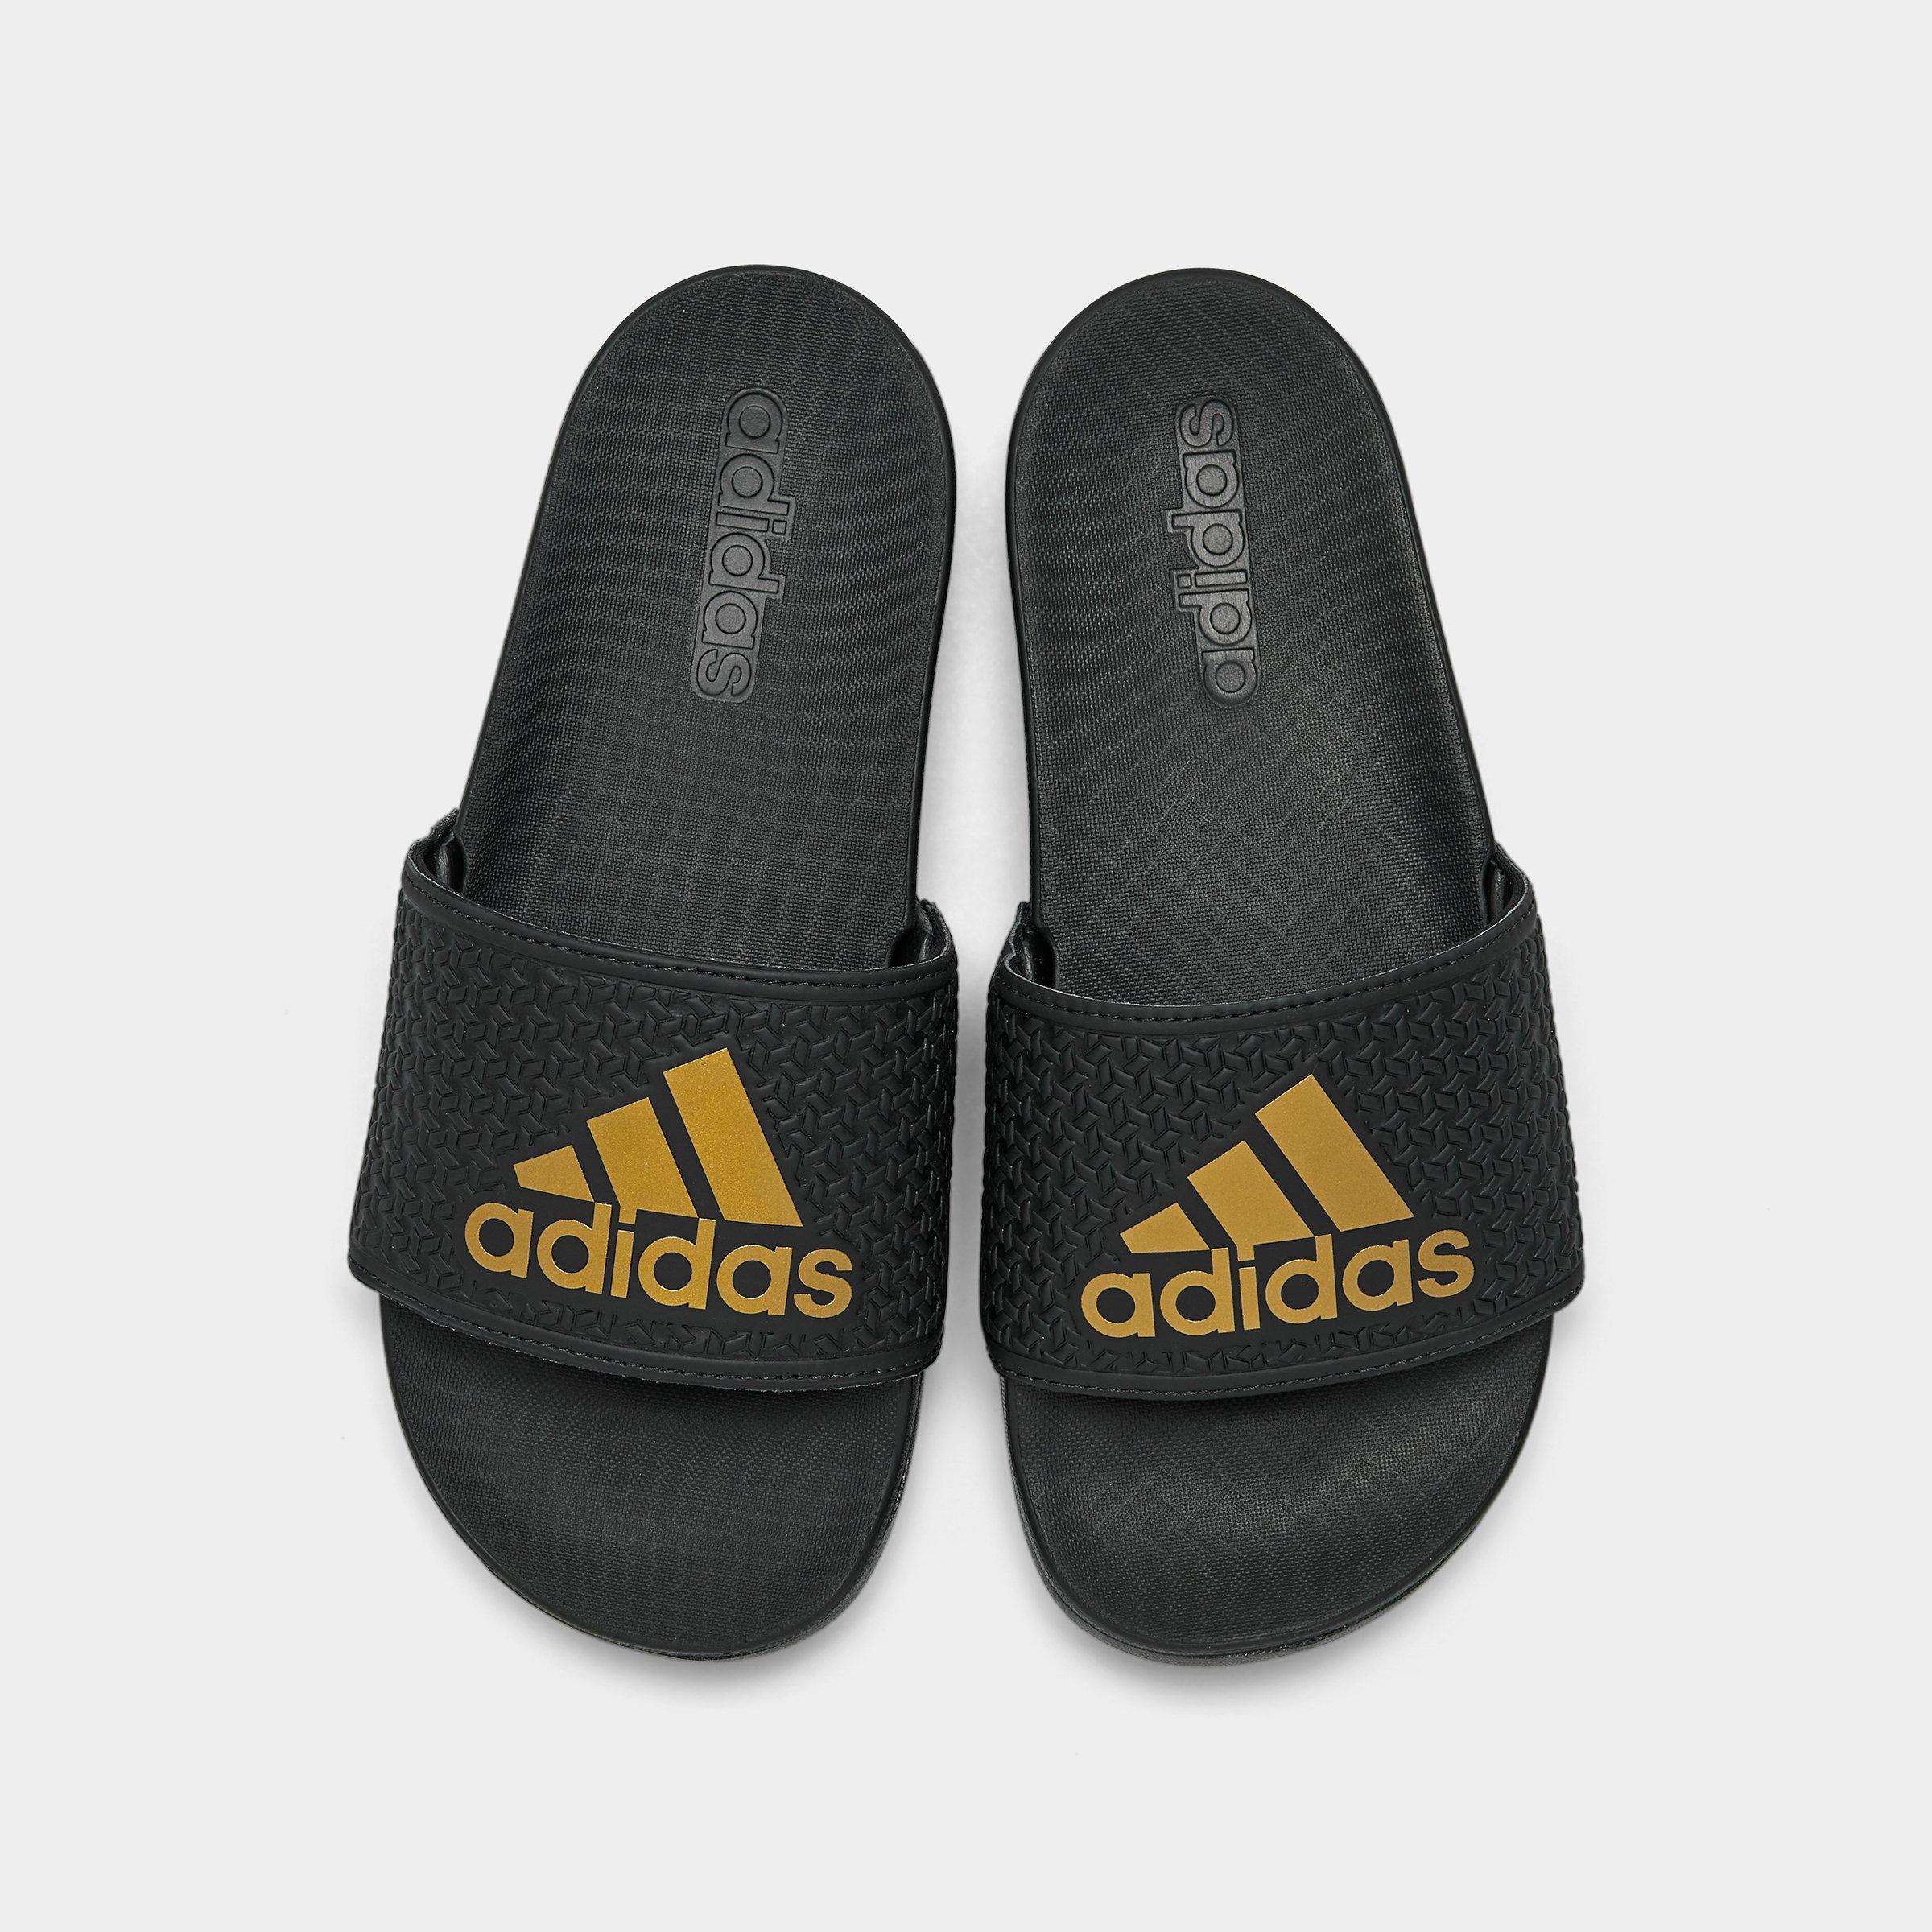 adidas sandals for girls